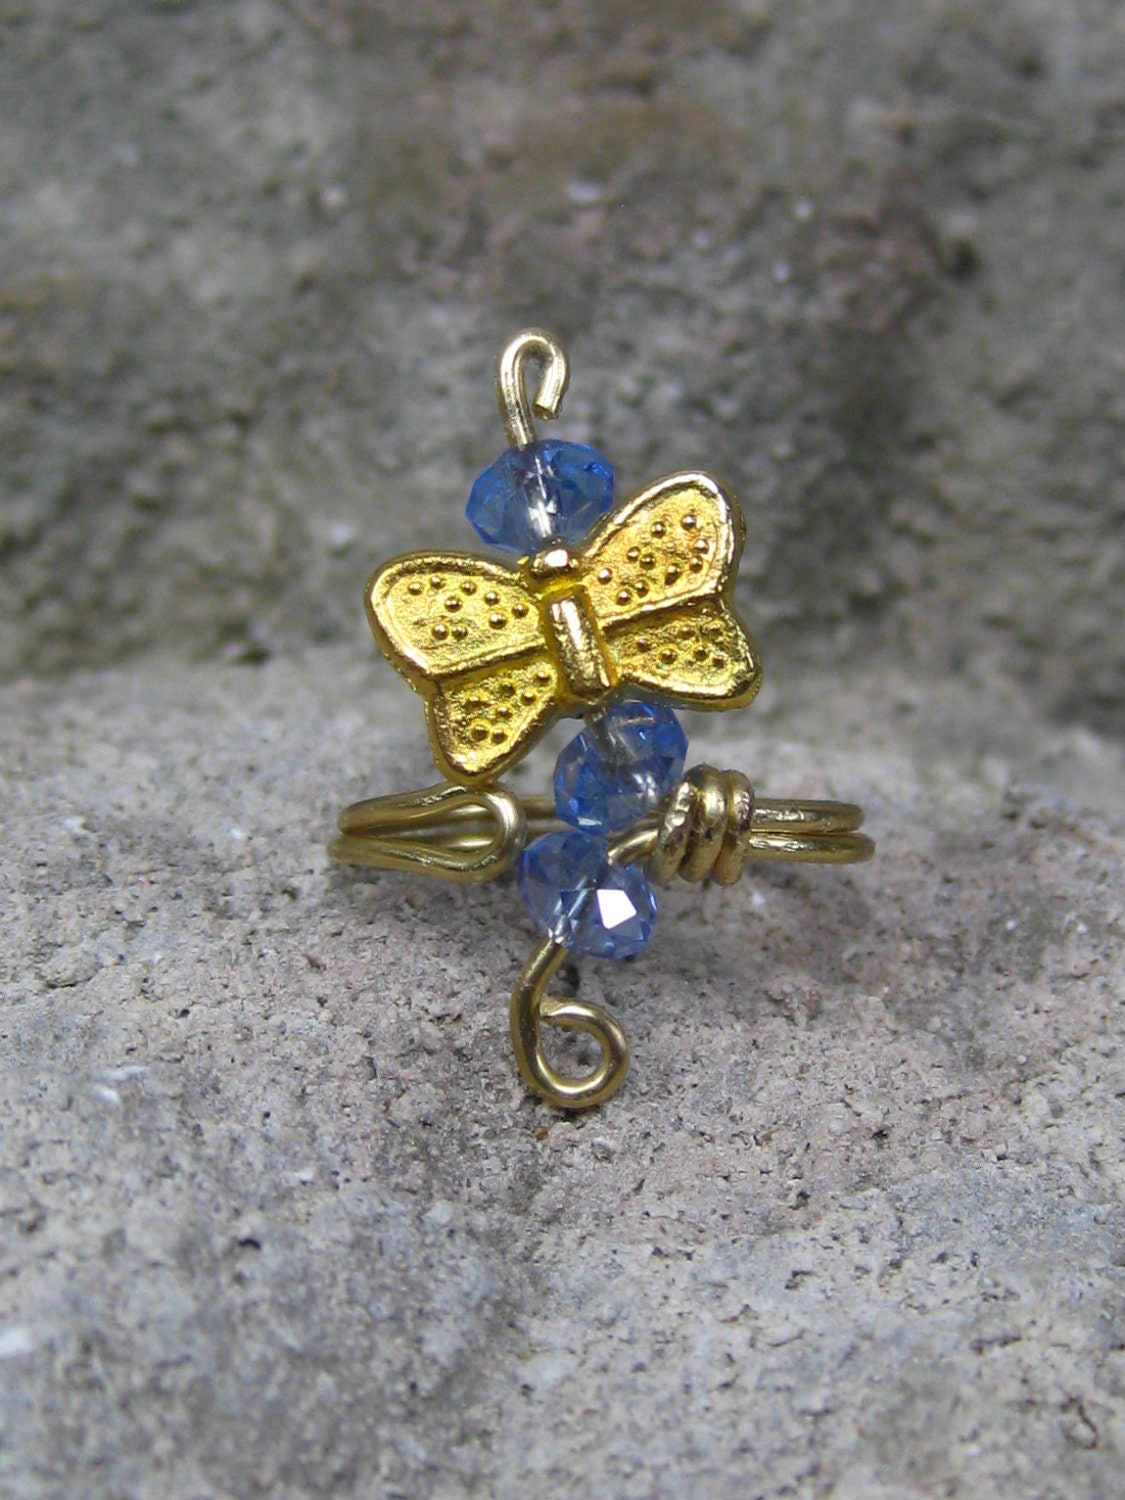 Toe-dally Butterfly Toe Ring, size 6 adjustable toe ring, blue crystals and a butterfly are perfect for summer foot jewelry